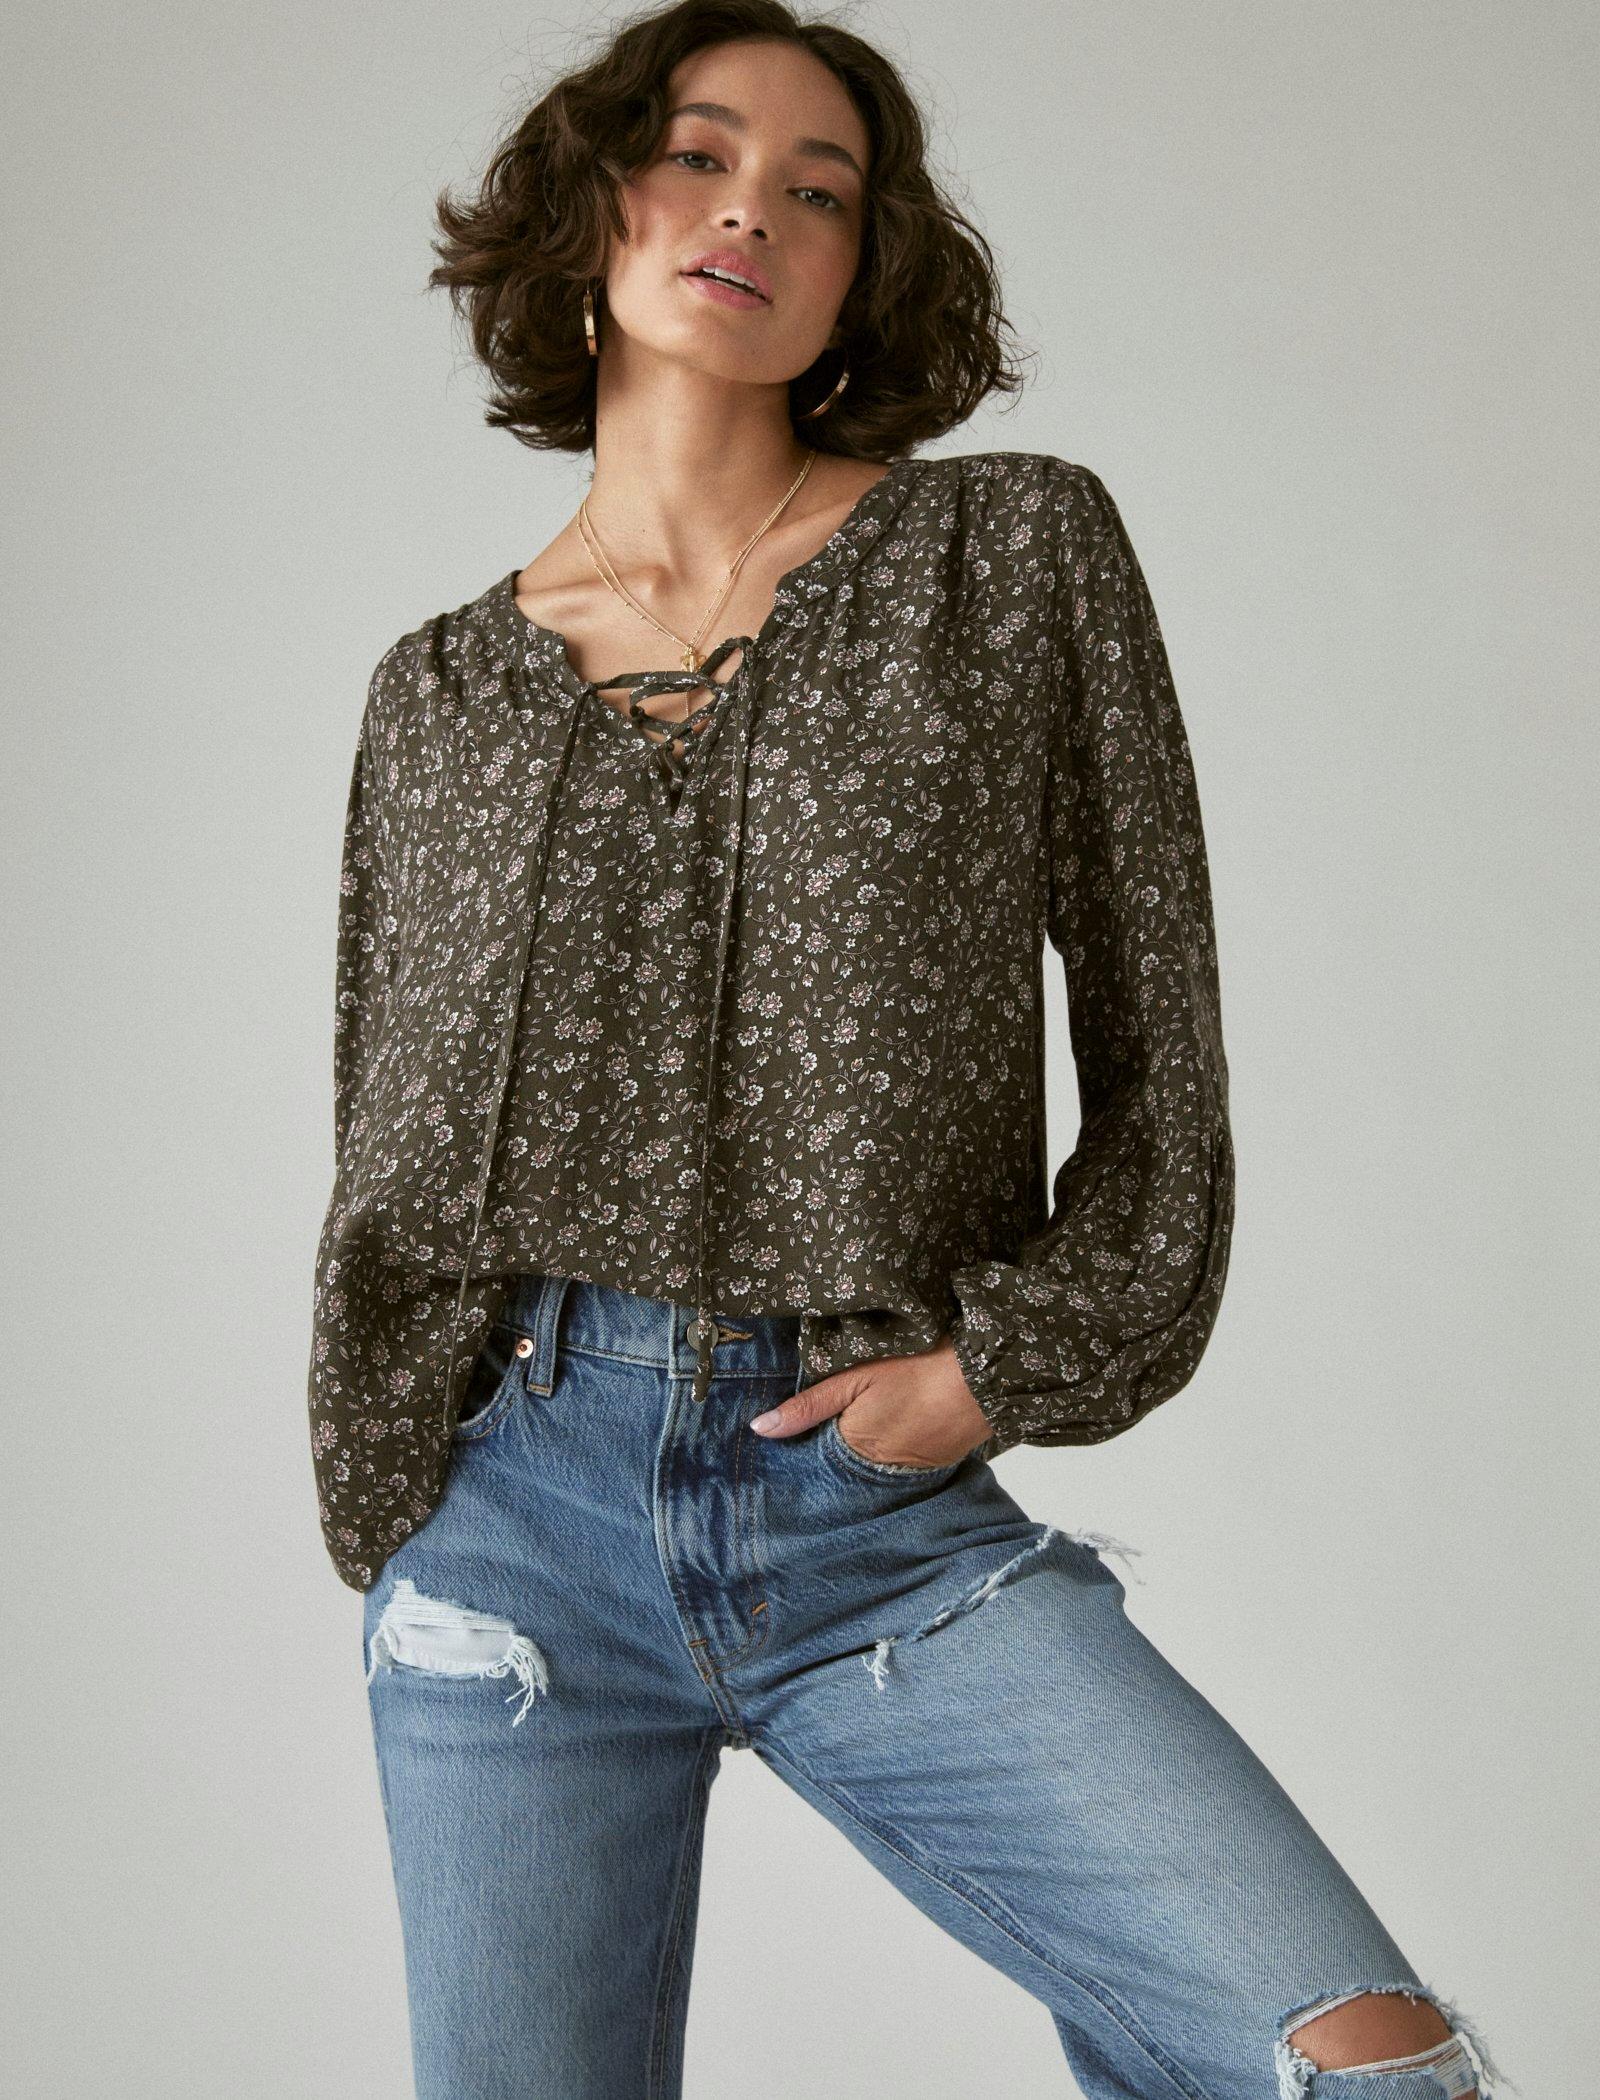 Lucky Brand Long Sleeve Printed Lace Up Blouse Black Multi